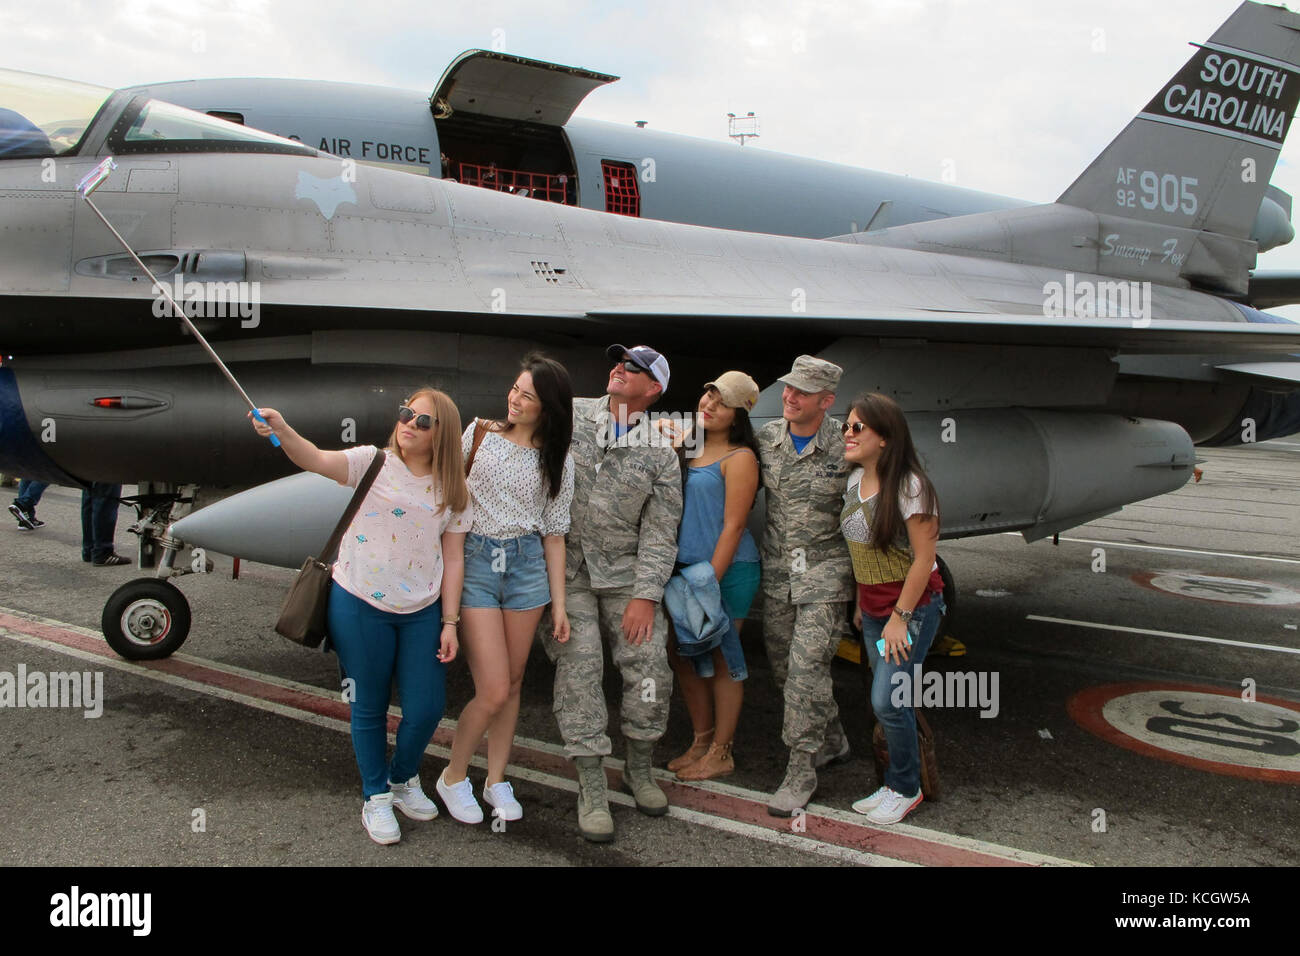 U.S. Air Force Senior Master Sgt. Charles Bowen (left) and Staff Sgt. Matthew Parent, both assigned to the South Carolina Air National Guard’s 169th Aircraft Maintenance Squadron, take a selfie with visitors to the Colombian Air Force’s Feria Aeronautica Internaccional – Colombia in Rionegro,  July 15, 2017. The South Carolina Air National Guard is supporting its State Partner with providing two F-16s to the air show at Rionegro, Antioquia, Colombia from July 13-16, 2017. The United States military participation in the air show provides an opportunity to strengthen our military-to-military rel Stock Photo